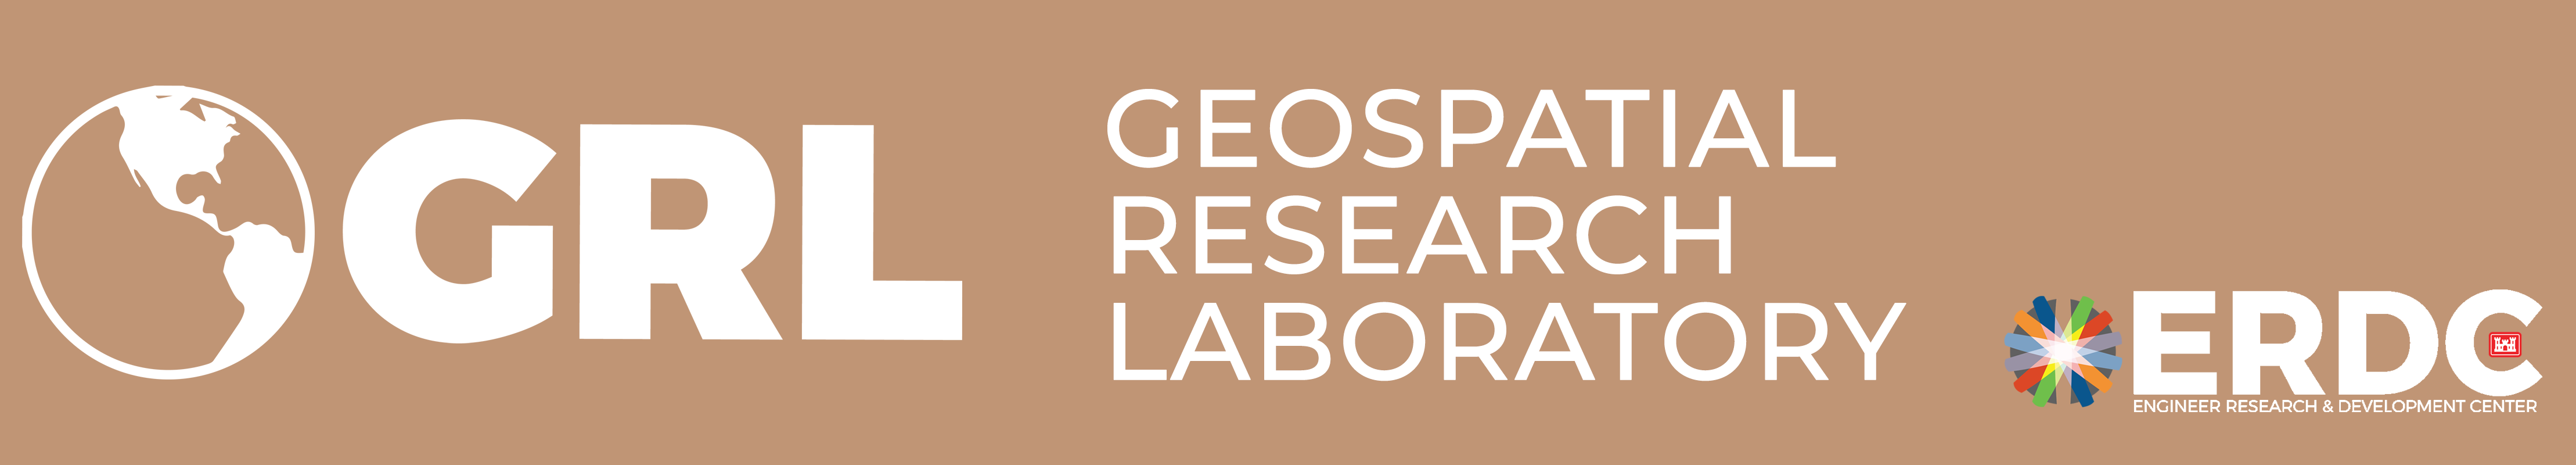 GRL's website banner. The logo is a simple illustration of the Earth with North and South American visible. The logo also says GRL, Geospatial Research Laboratory, and includes the ERDC logo.